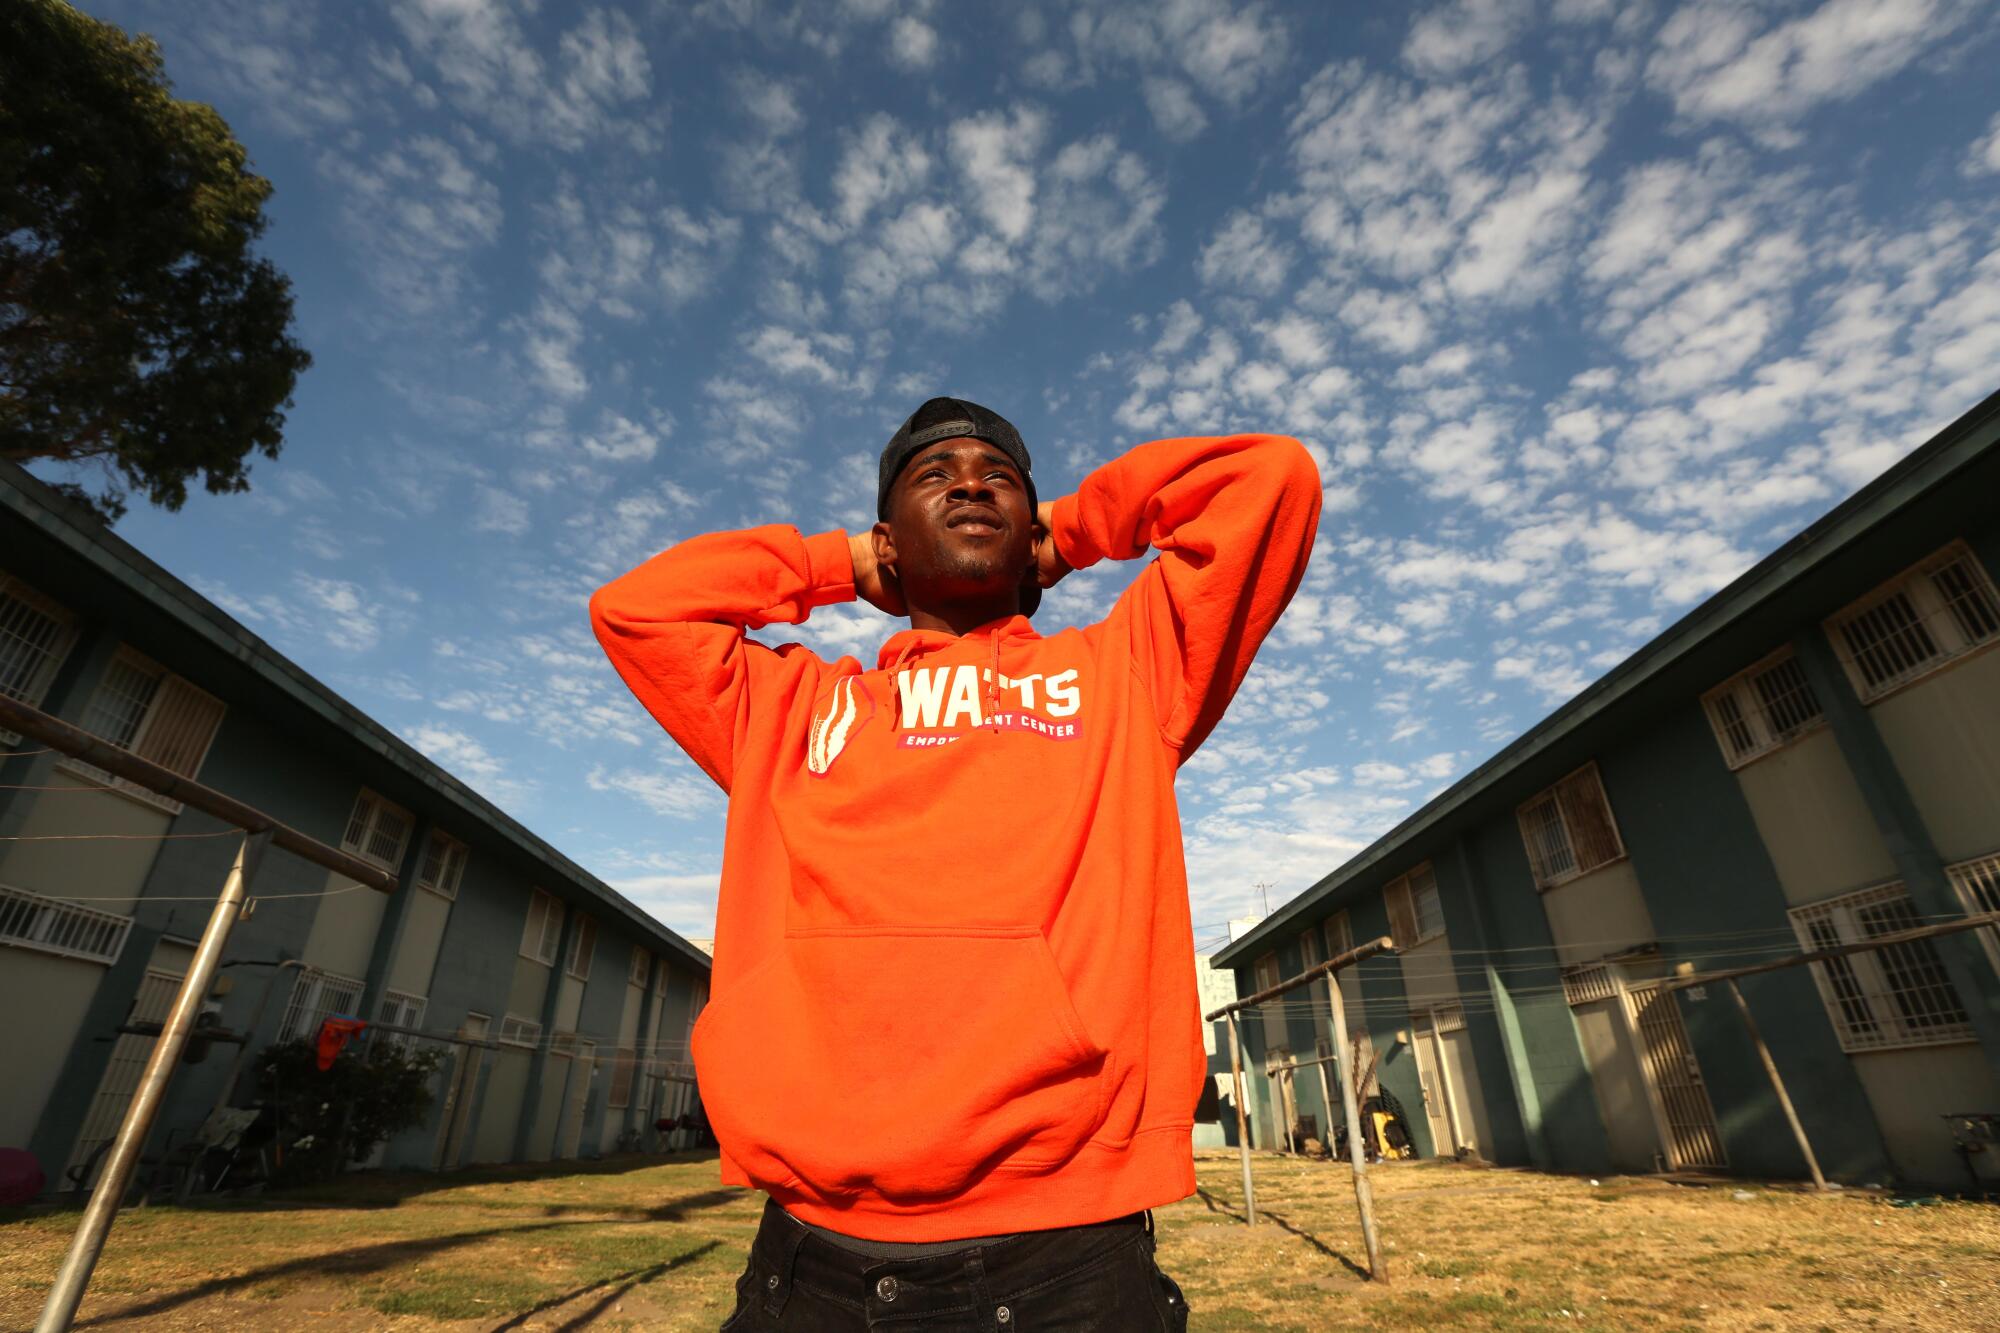 "Been a lot going on," said Tim Lee, 17, about all the gun violence at the Imperial Courts housing project in Watts. 